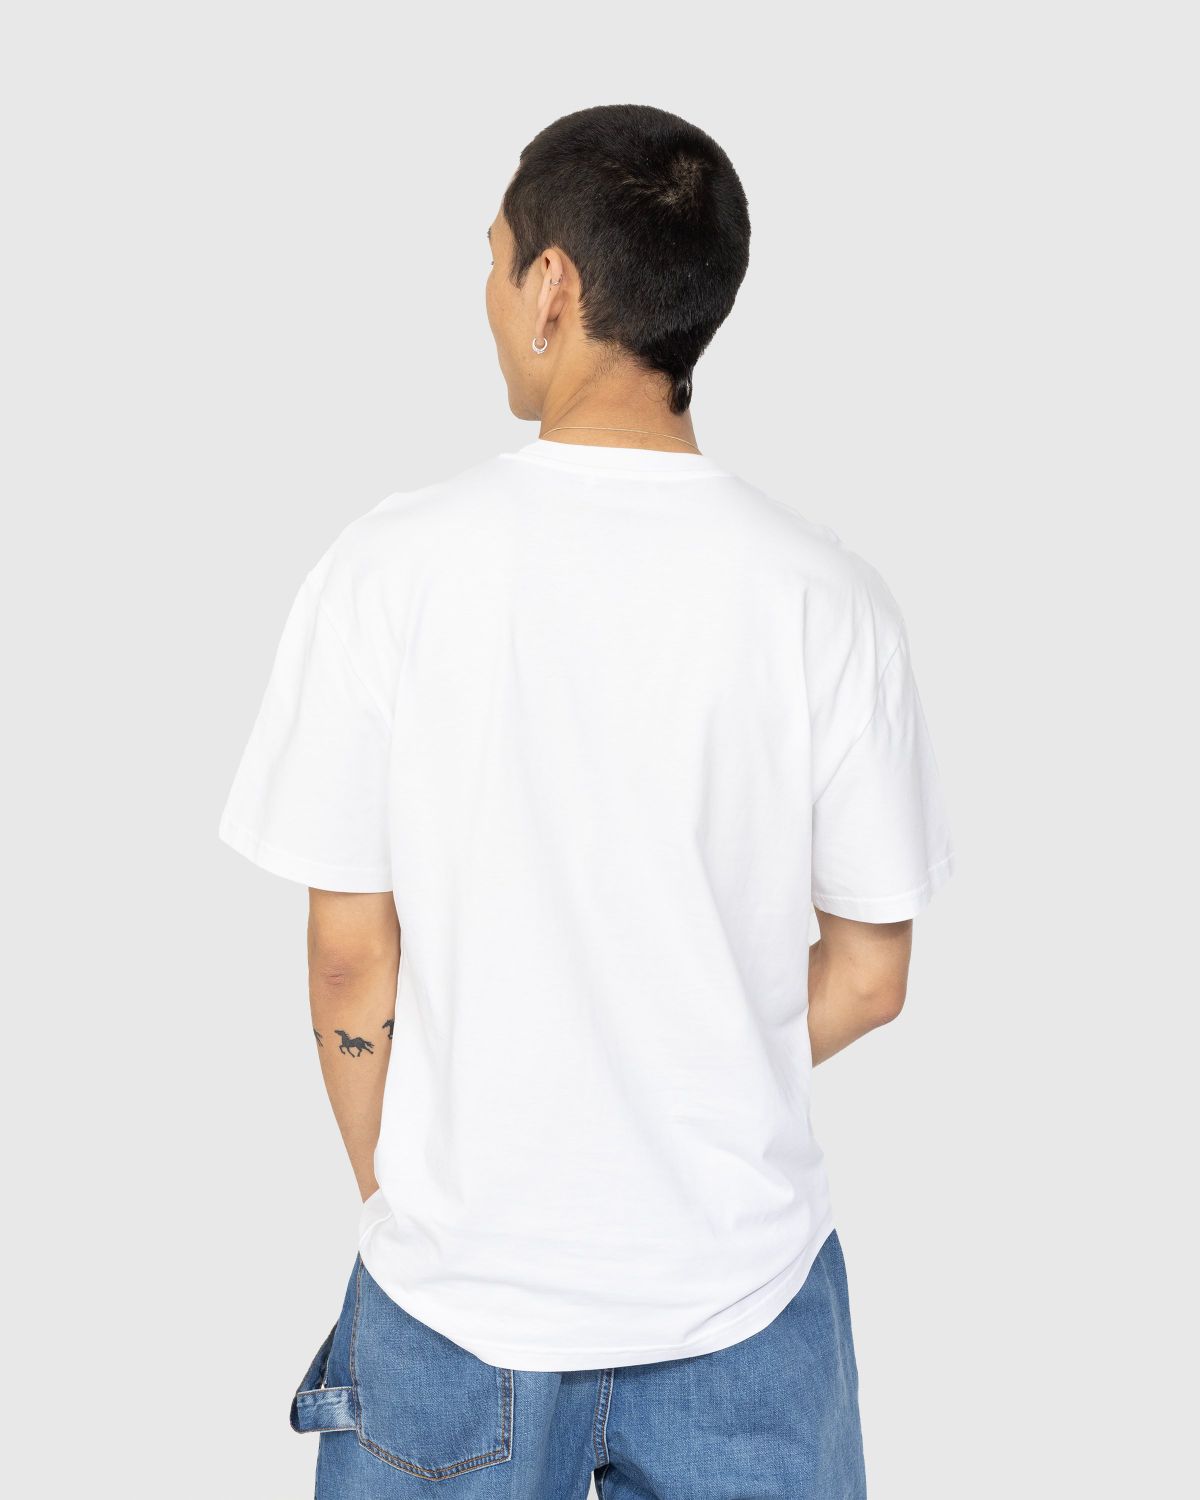 J.W. Anderson – Anchor Patch T-Shirt White - T-shirts - White - Image 3